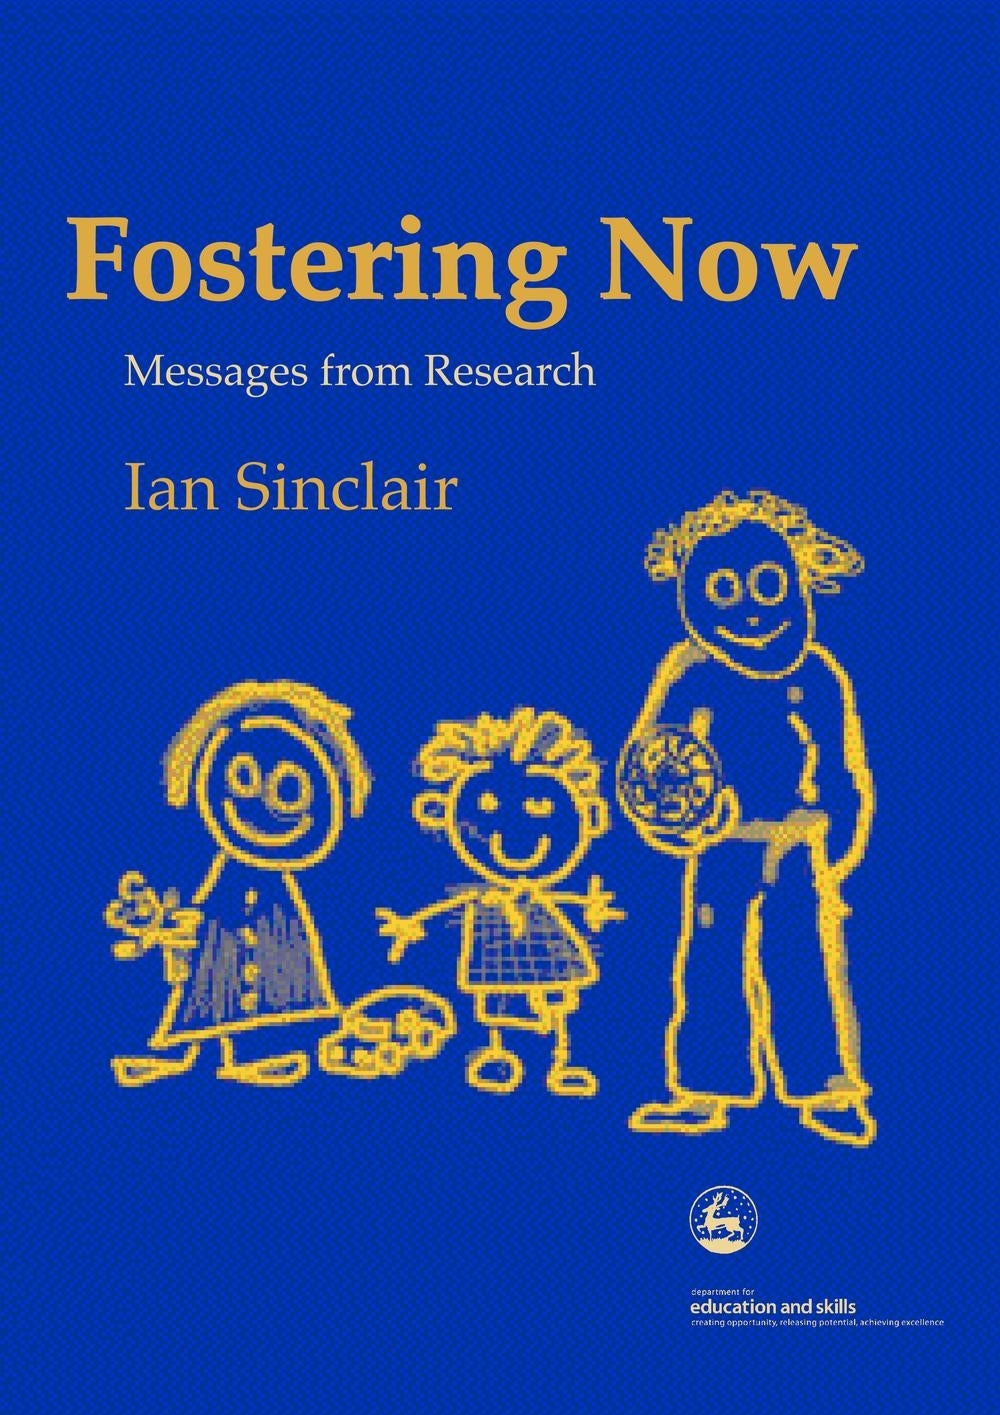 Fostering Now by Ian Sinclair